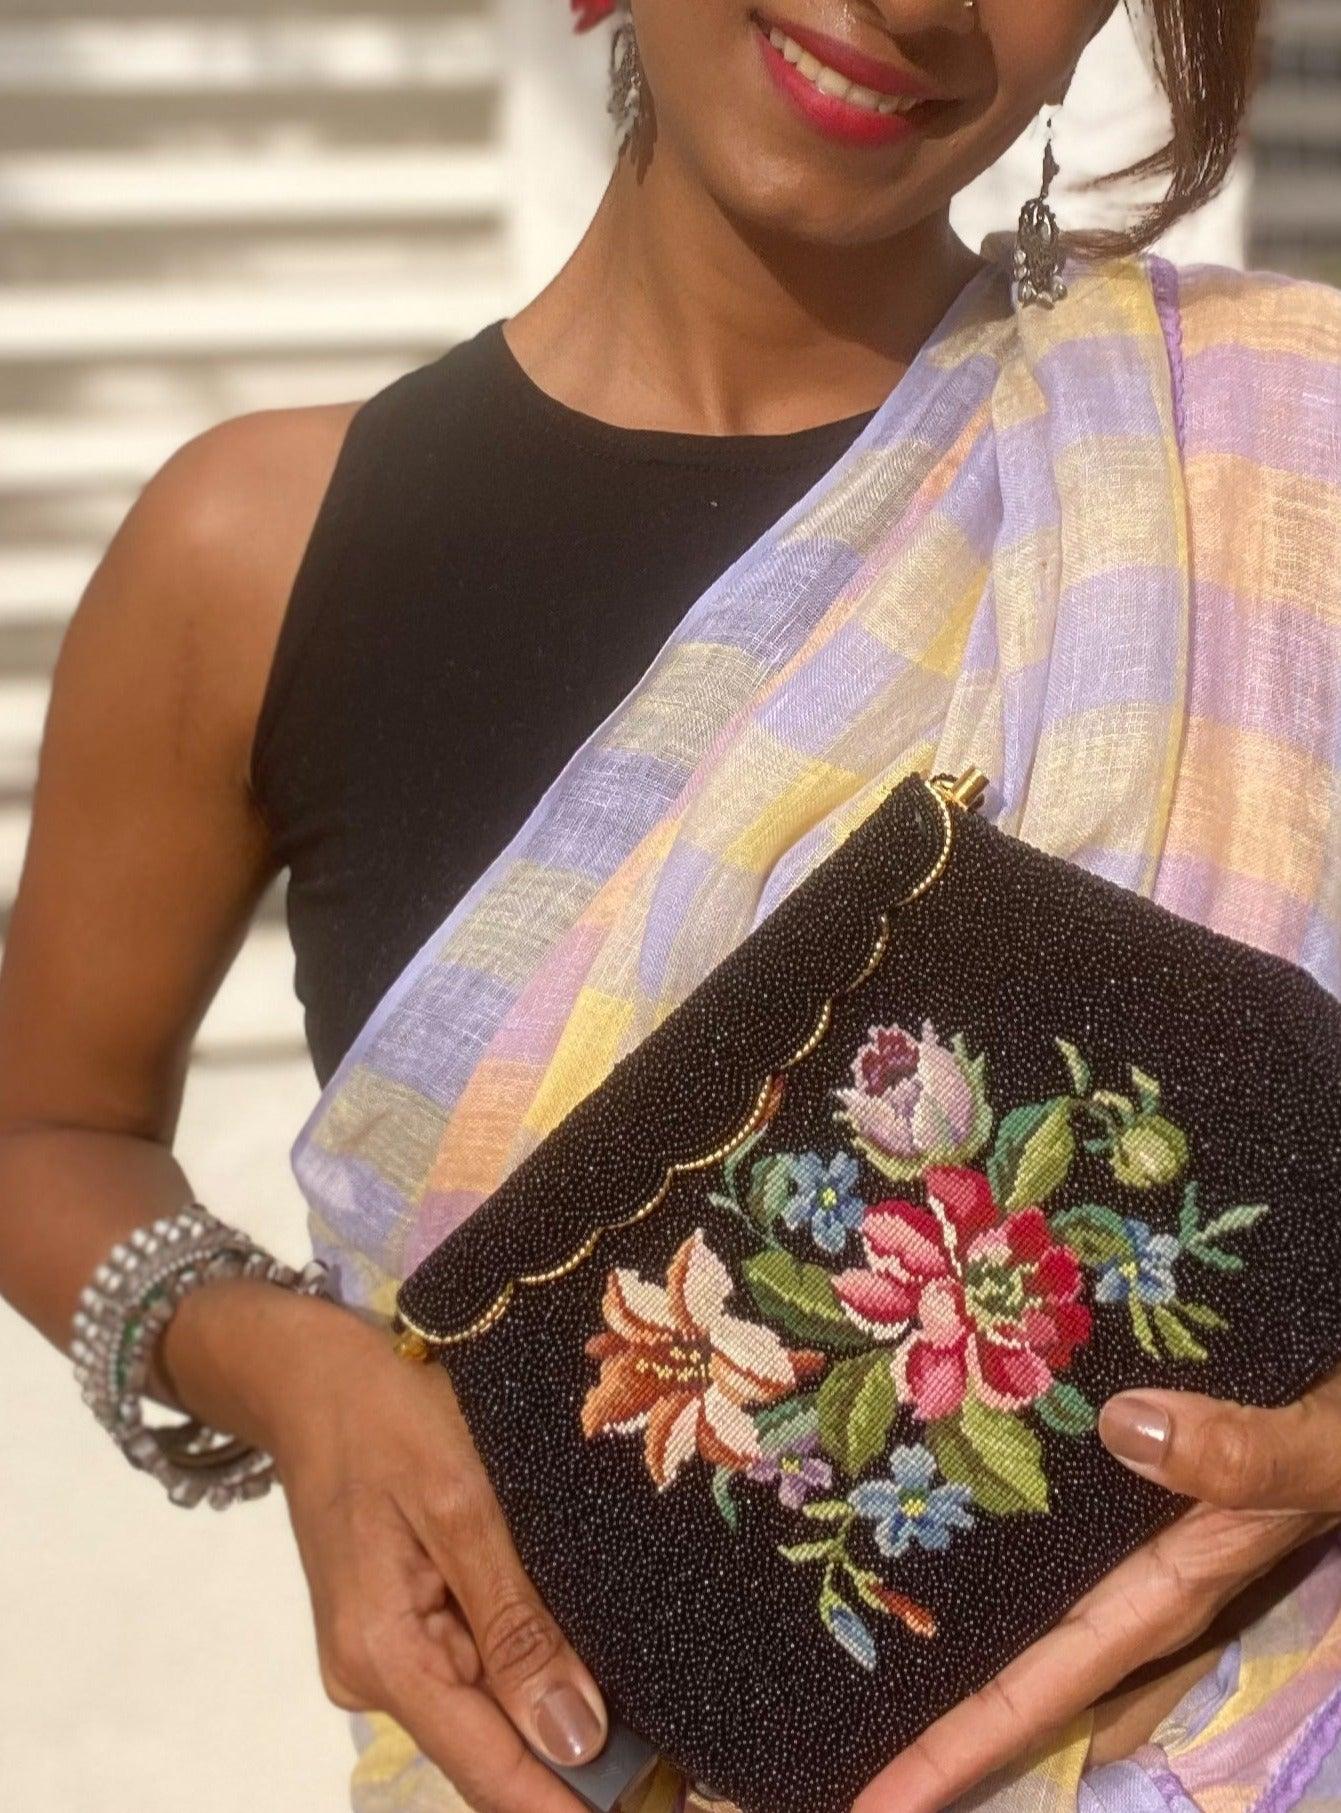 Vintage Beaded Purse with Petit Point from 1950's - Rachana Reddy